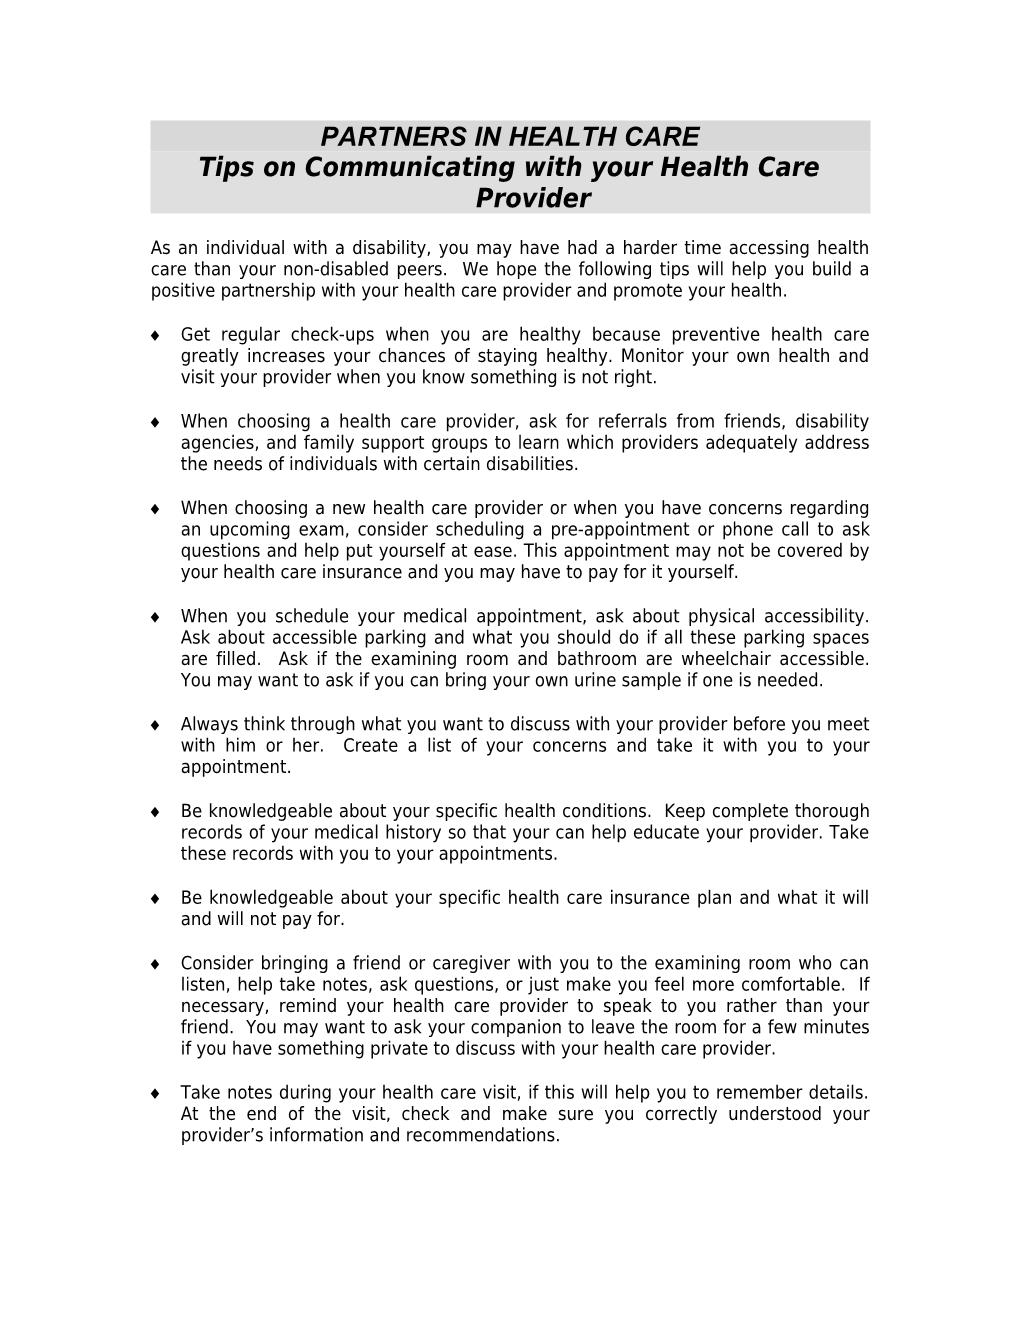 Tips on Communicating with Your Health Care Provider